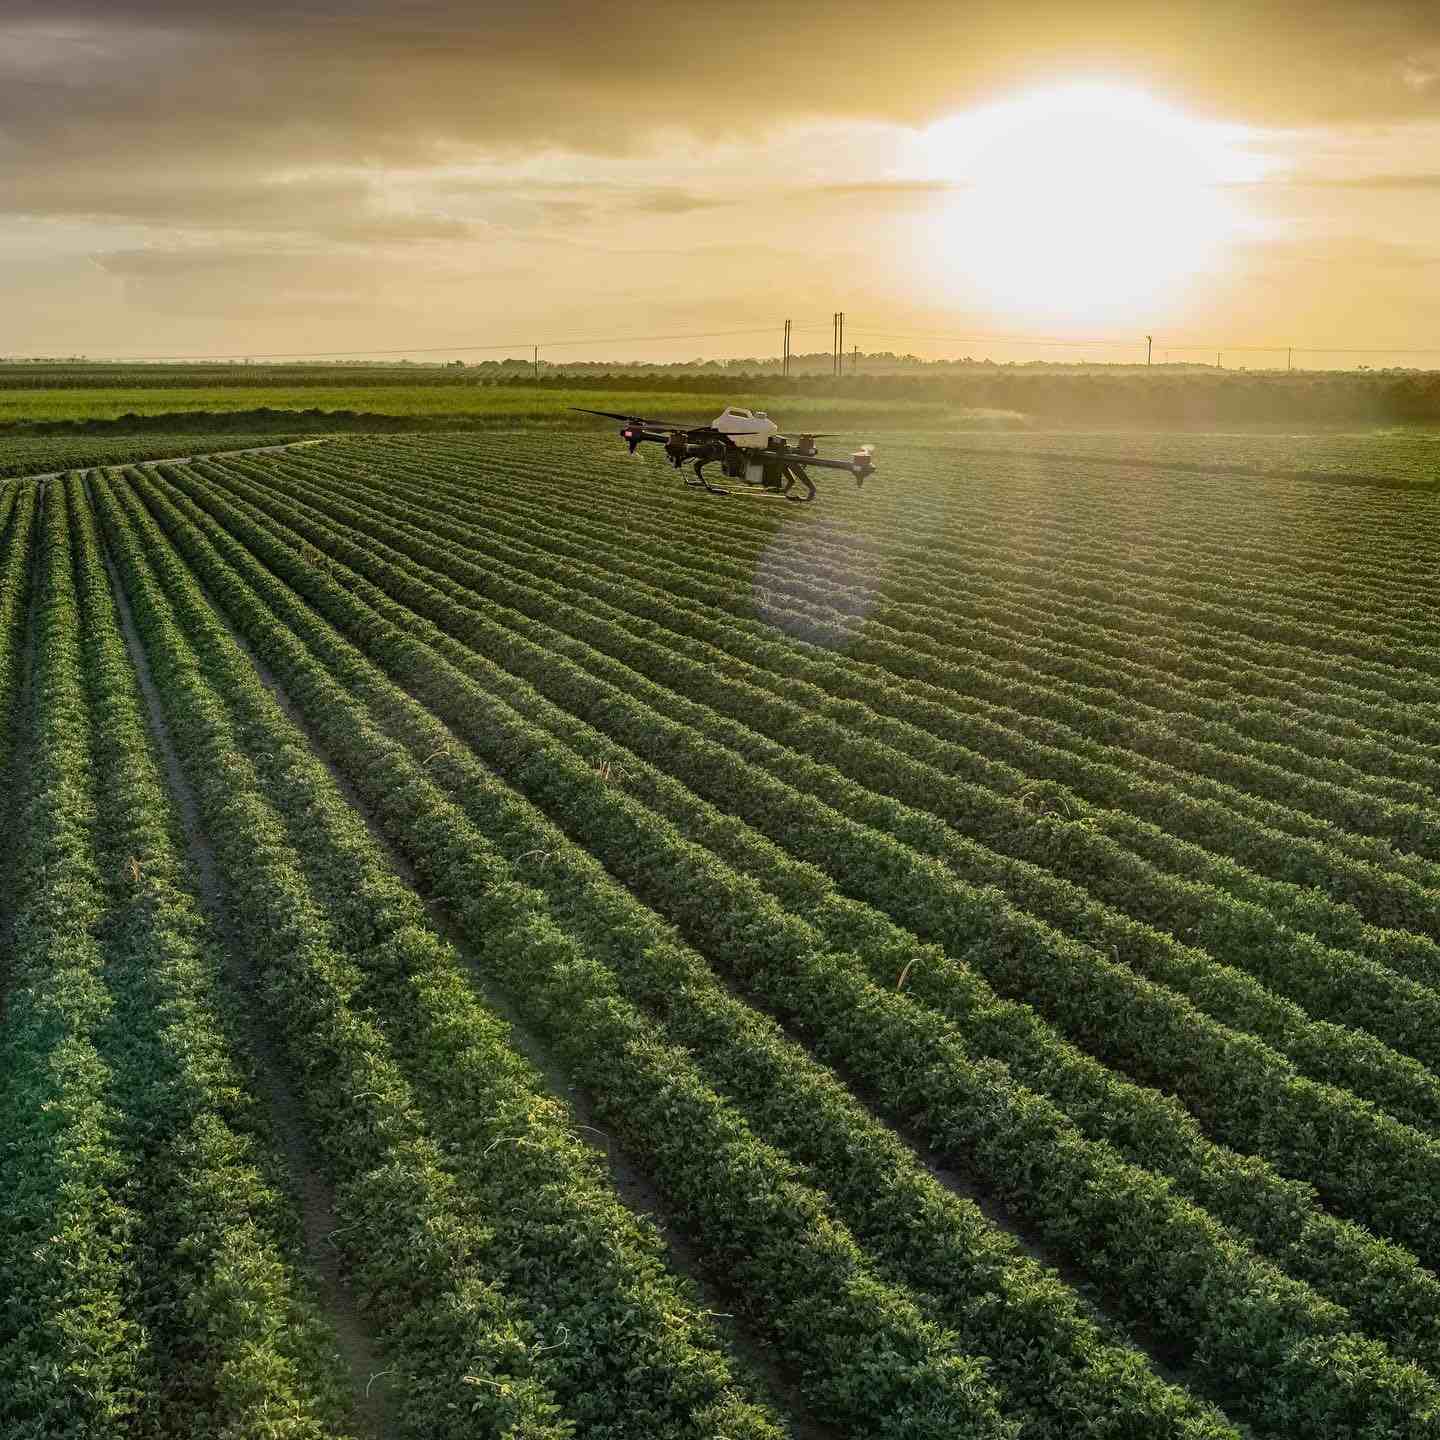 Working from sunrise to sunset, the spray drone would never feel tired and were straight back in to protecting a large piece of waterlogged crops after the heavy rain.